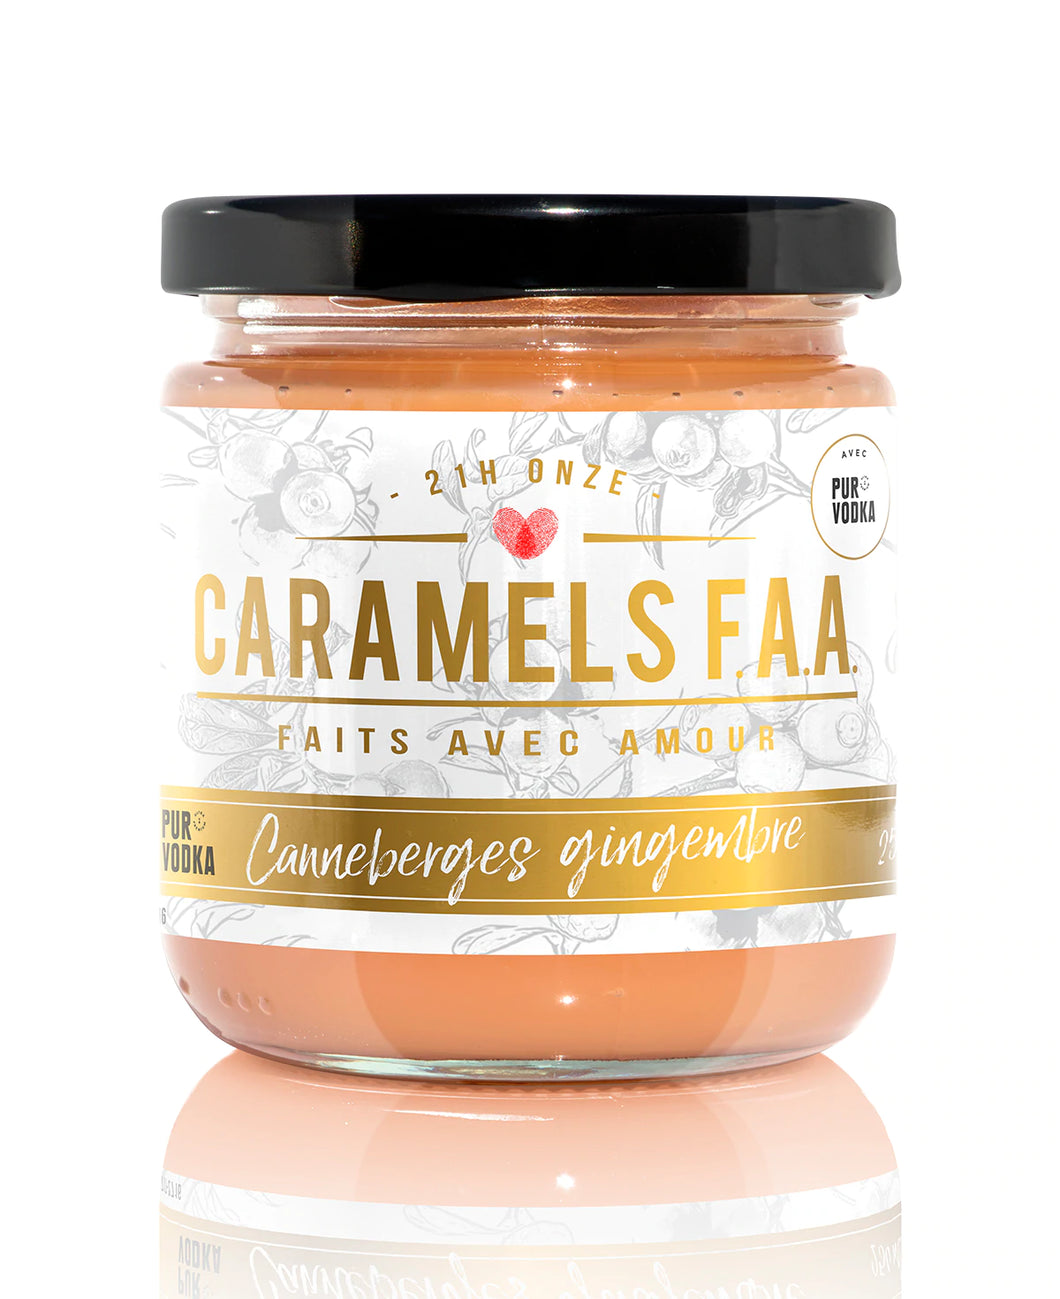 Caramel FAA (Pur vodka canneberges gingembre)